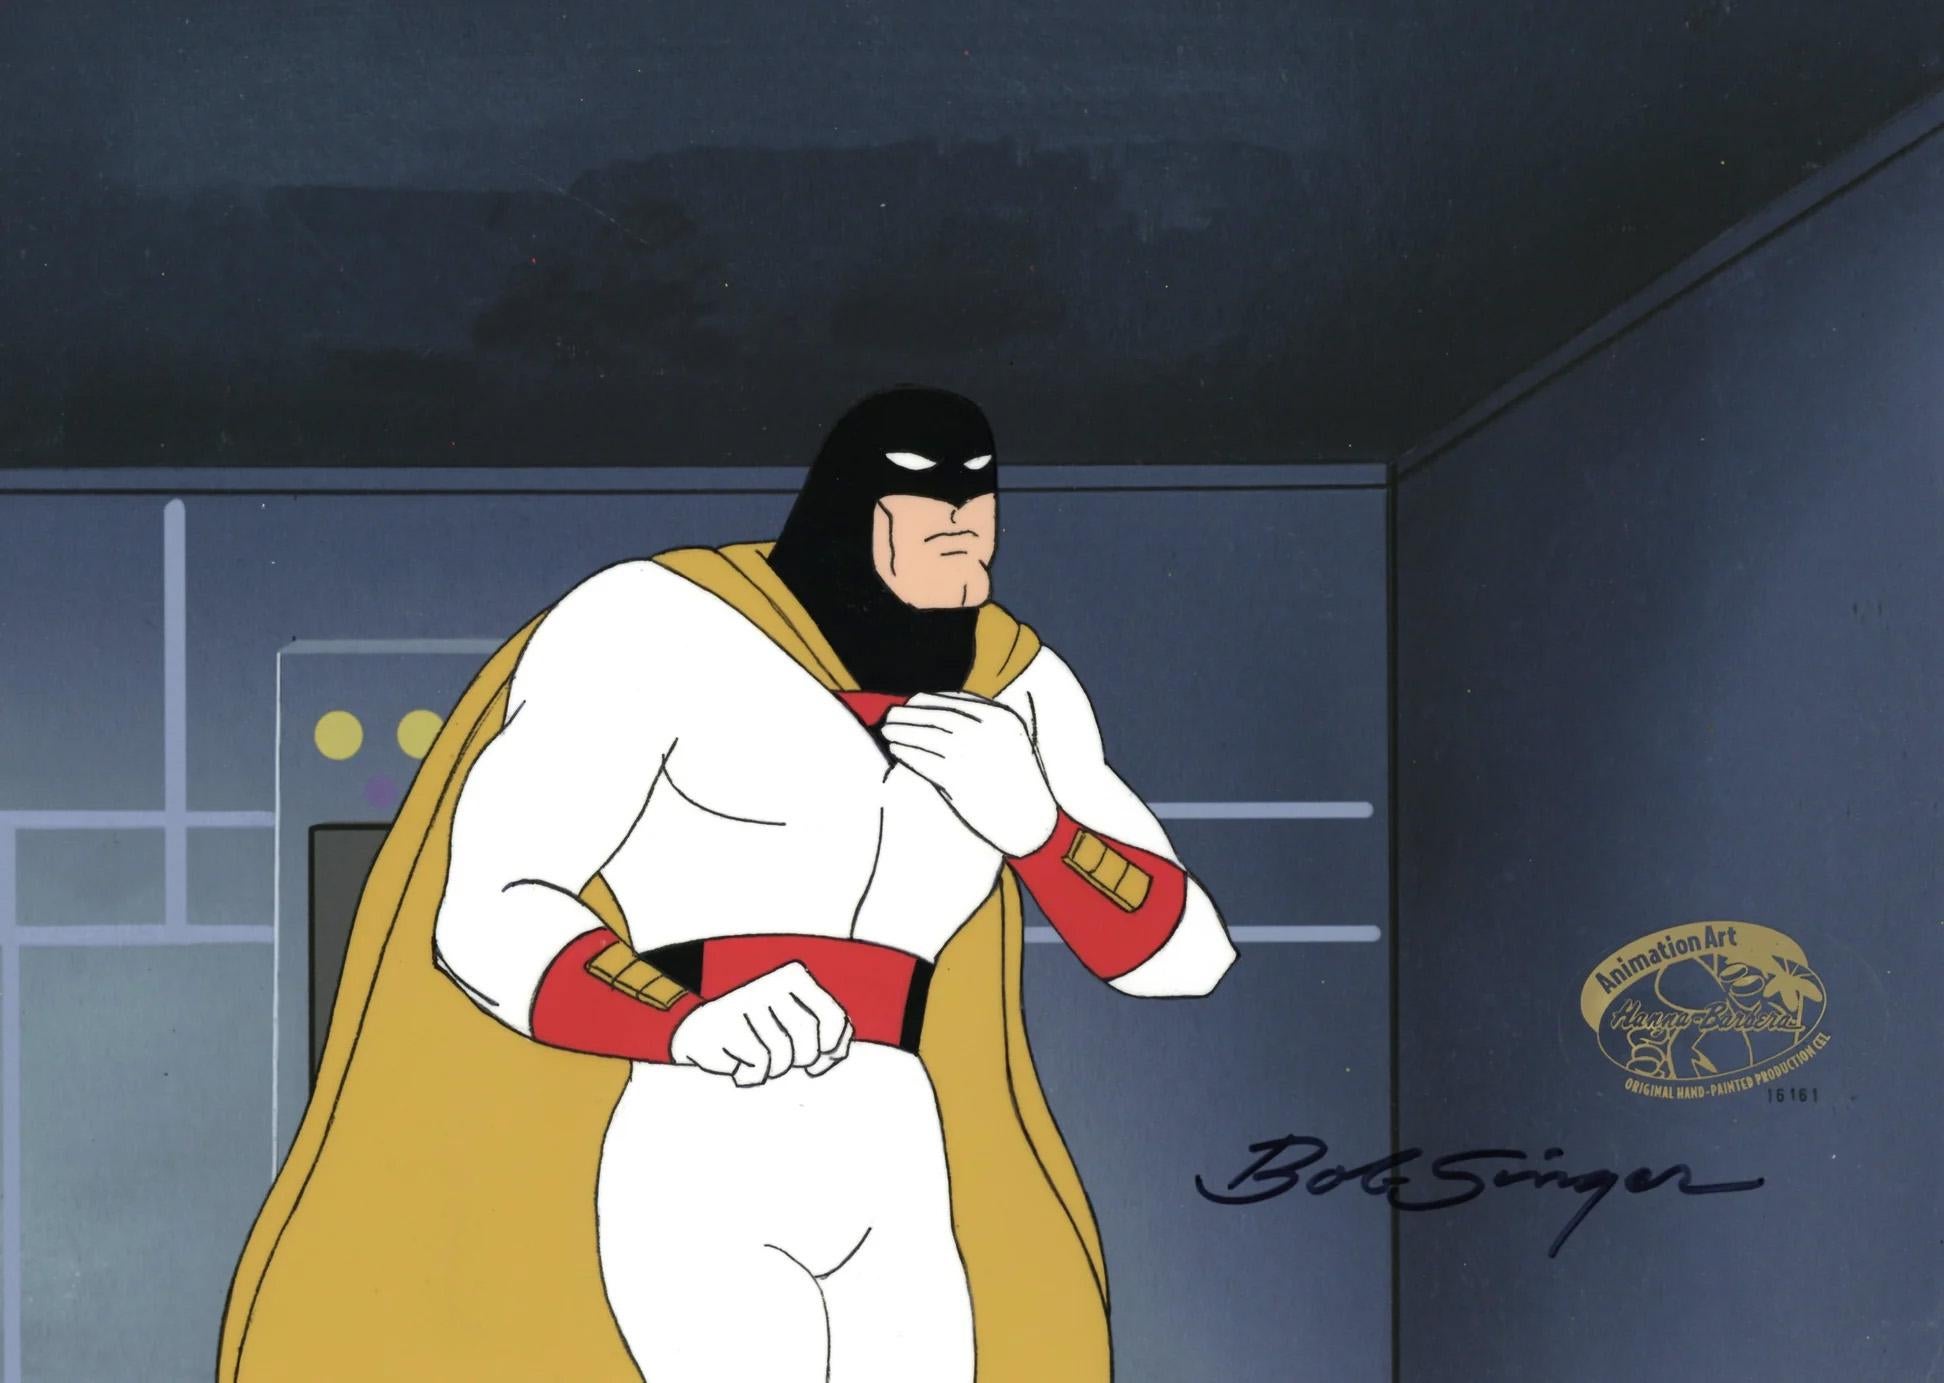 Space Ghost Original Production Cel Signed by Bob Singer - Art by Hanna Barbera Studio Artists